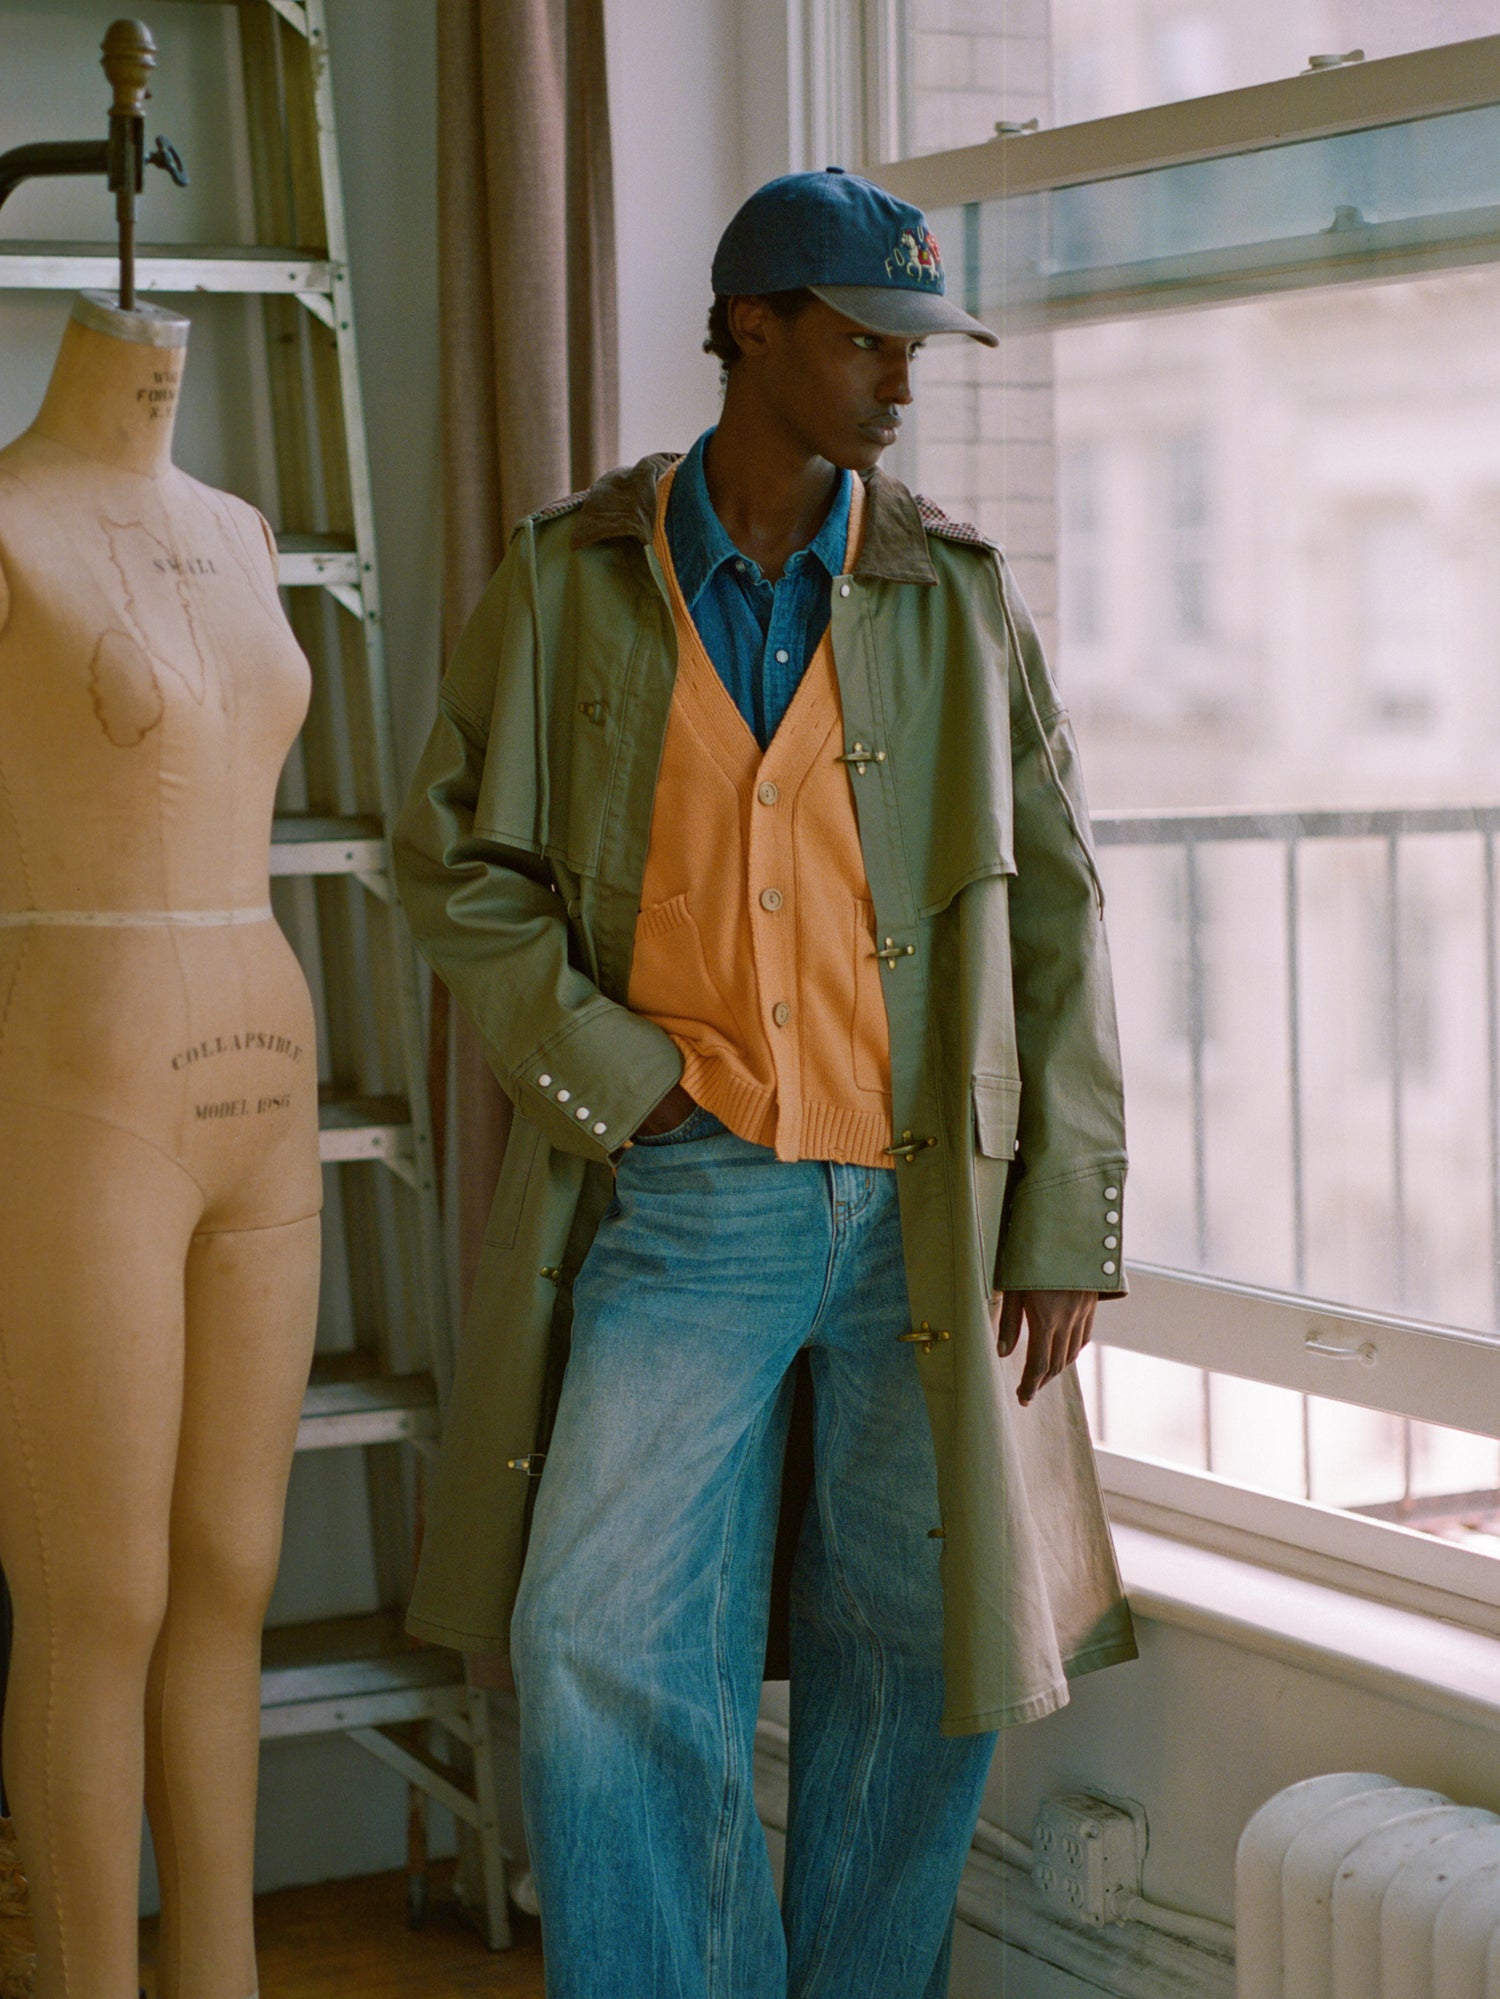 The model is wearing a yellow Cadmium Distressed cardigan and tan trousers.